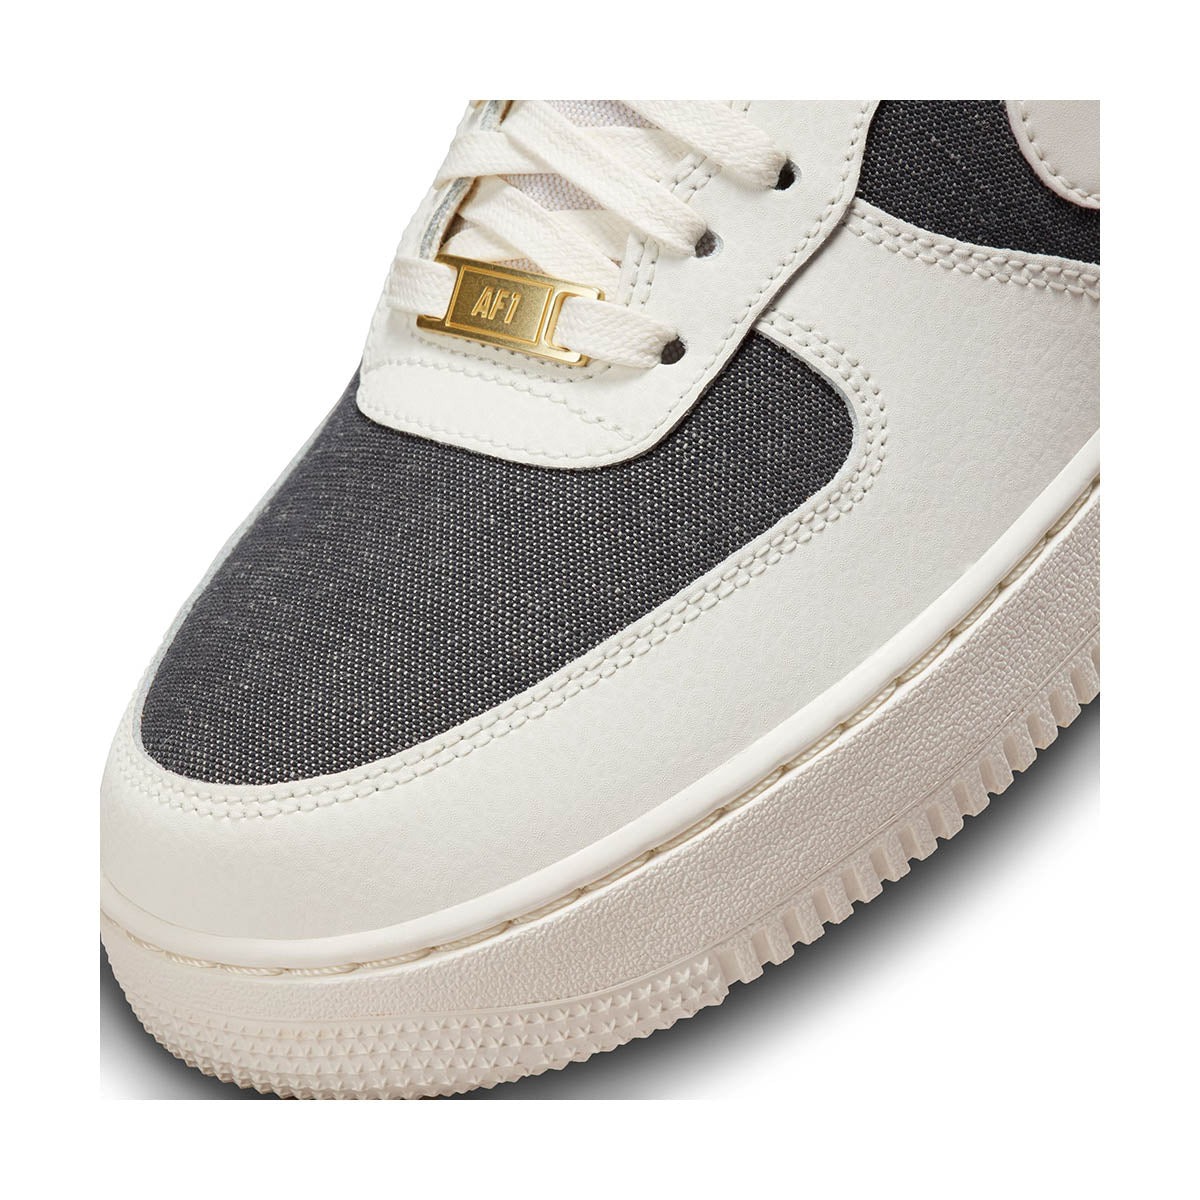 Nike Men's Air Force 1 '07 Shoes